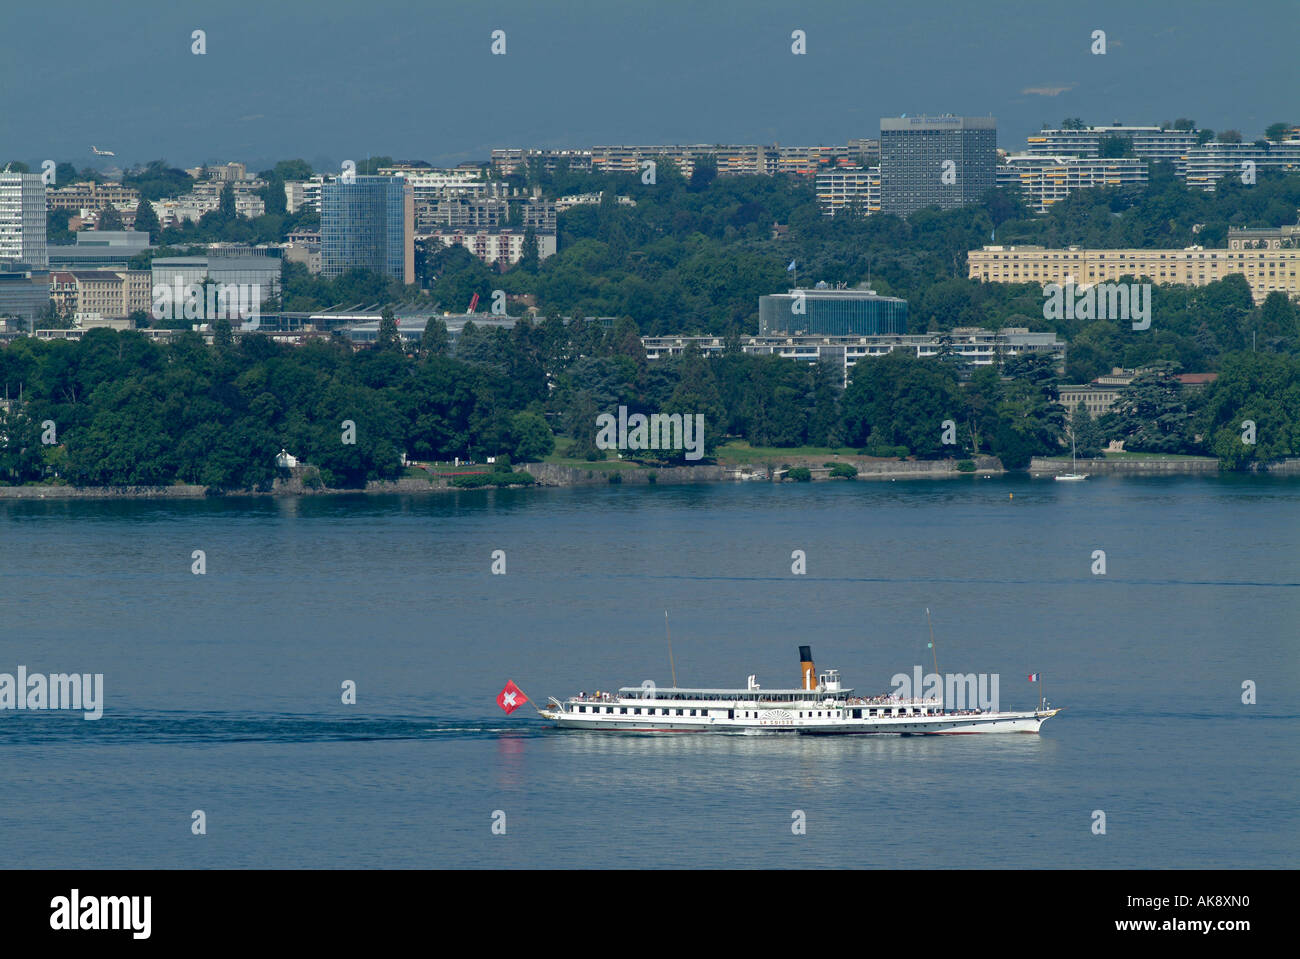 Geneva. Lake Geneva with boat and buildings of internatioal organizations on the other side of the lake. Stock Photo